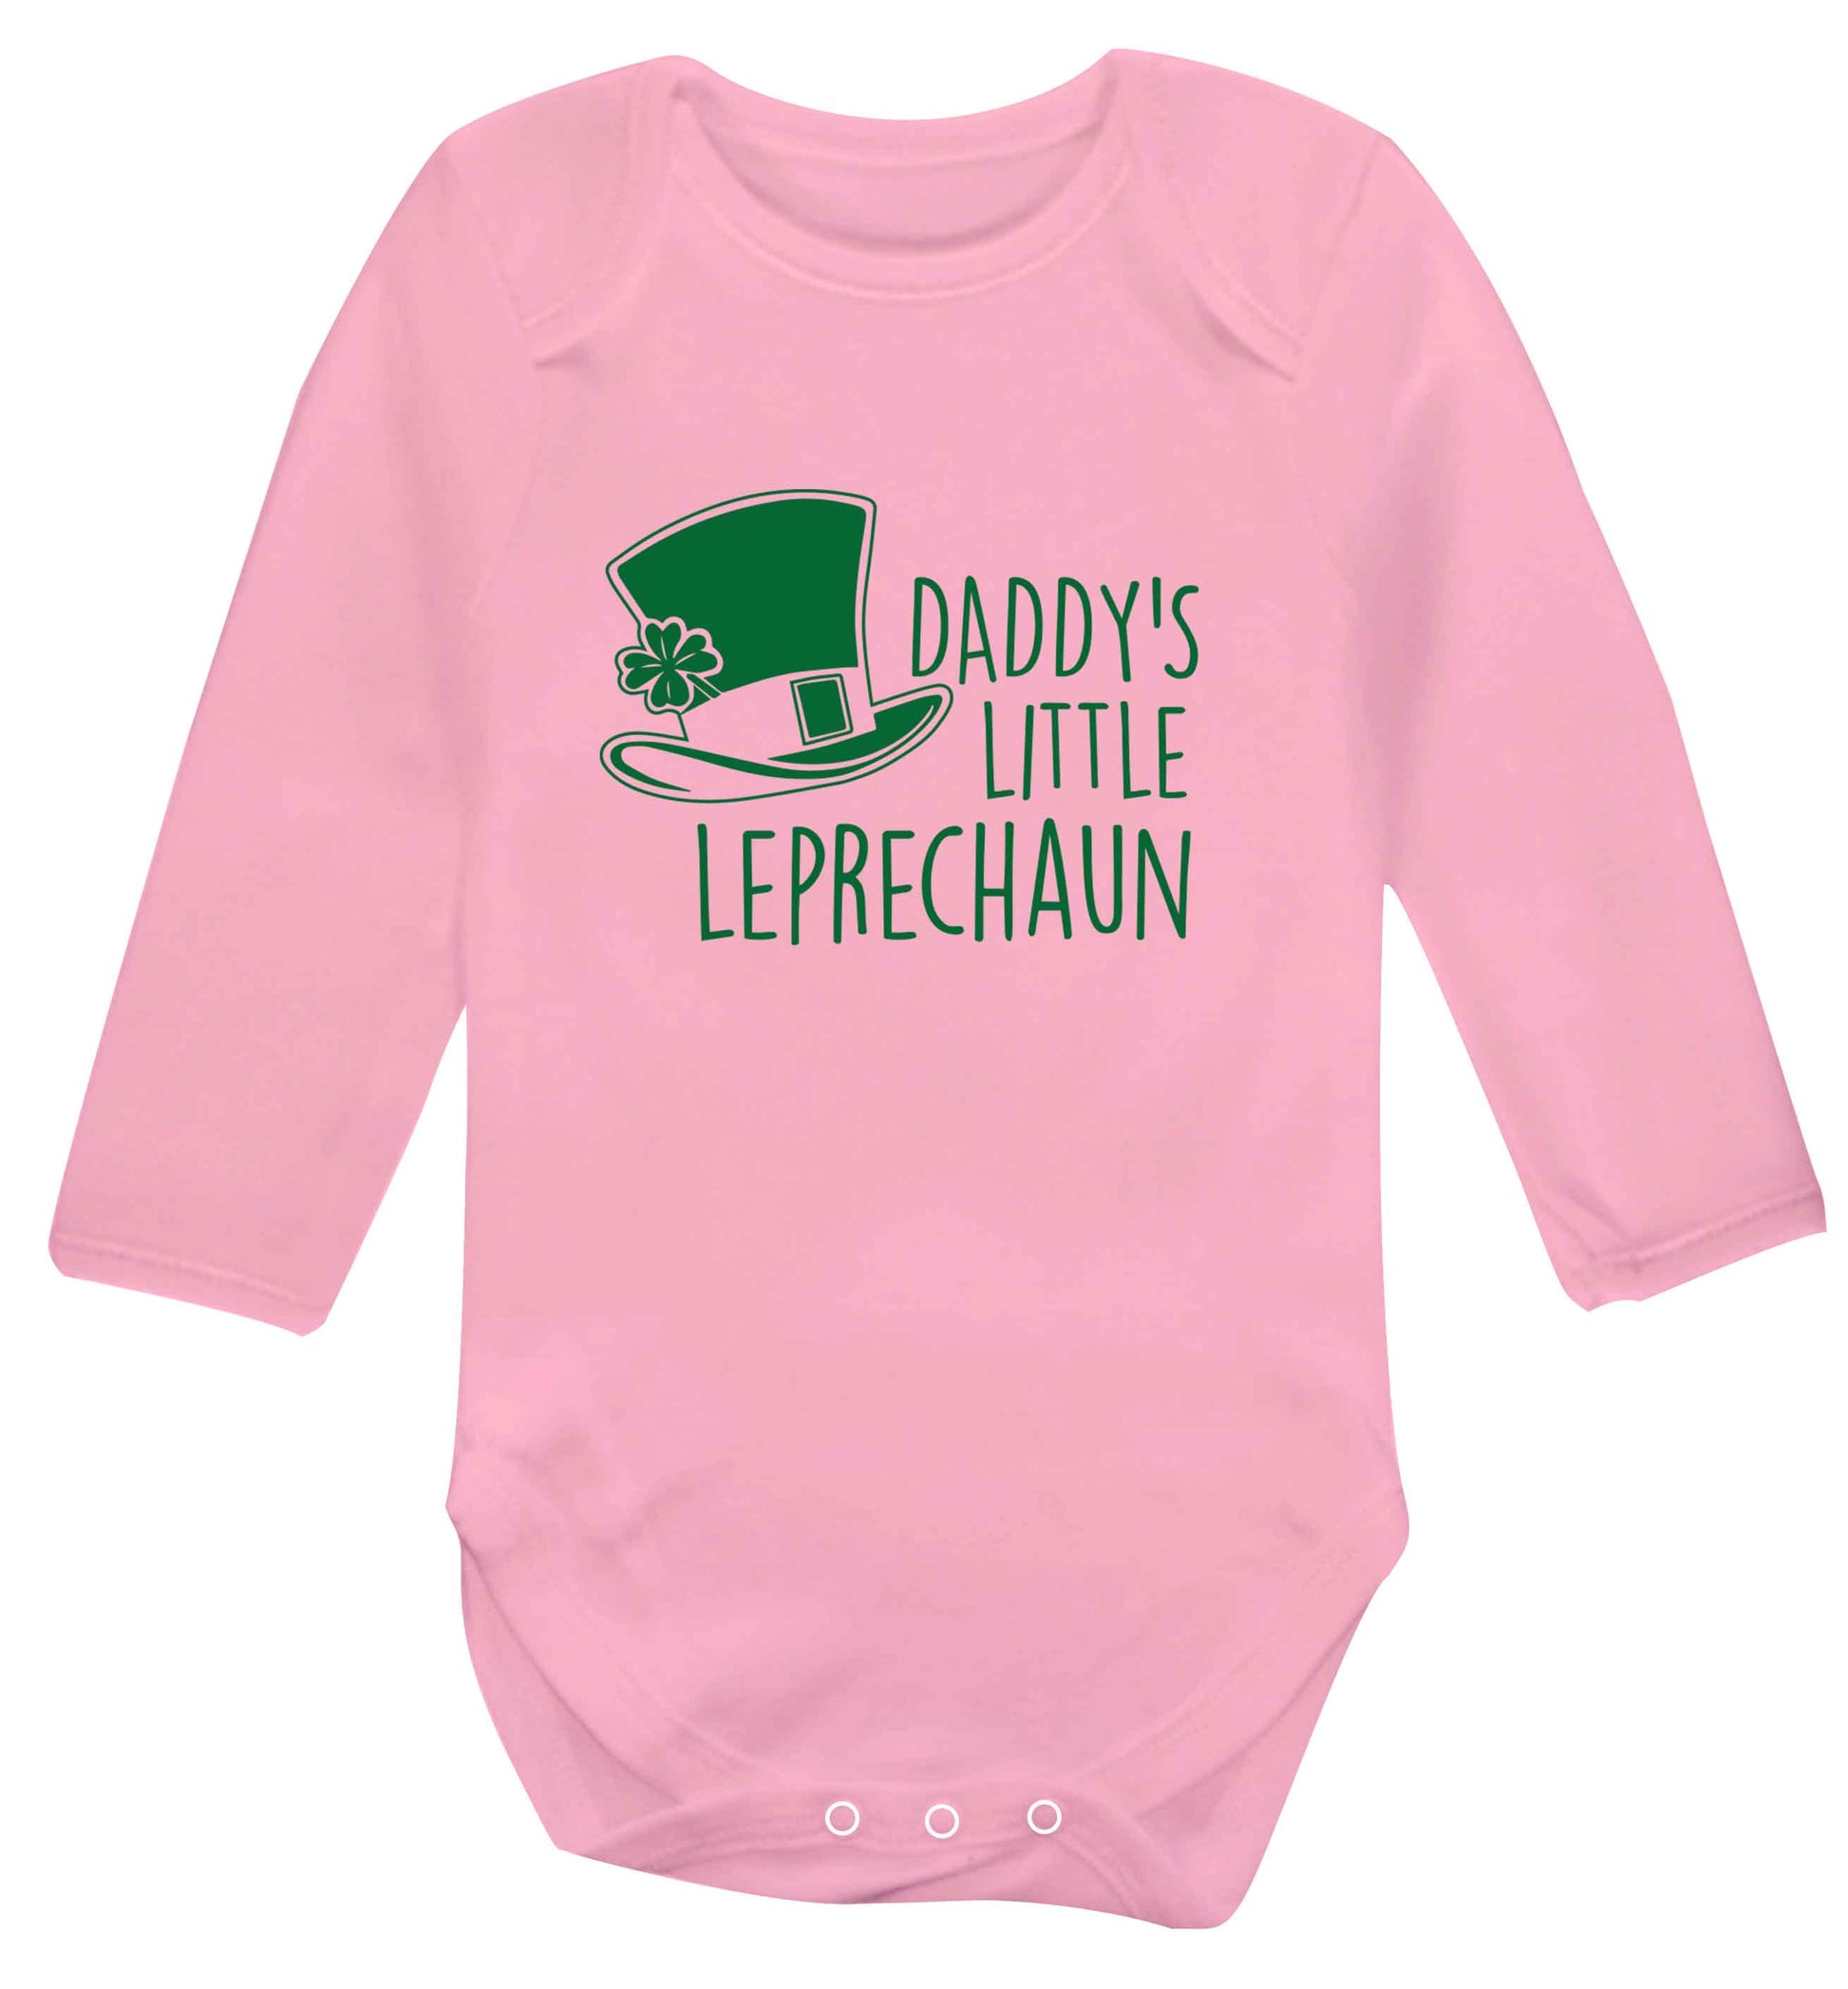 Daddy's lucky charm baby vest long sleeved pale pink 6-12 months